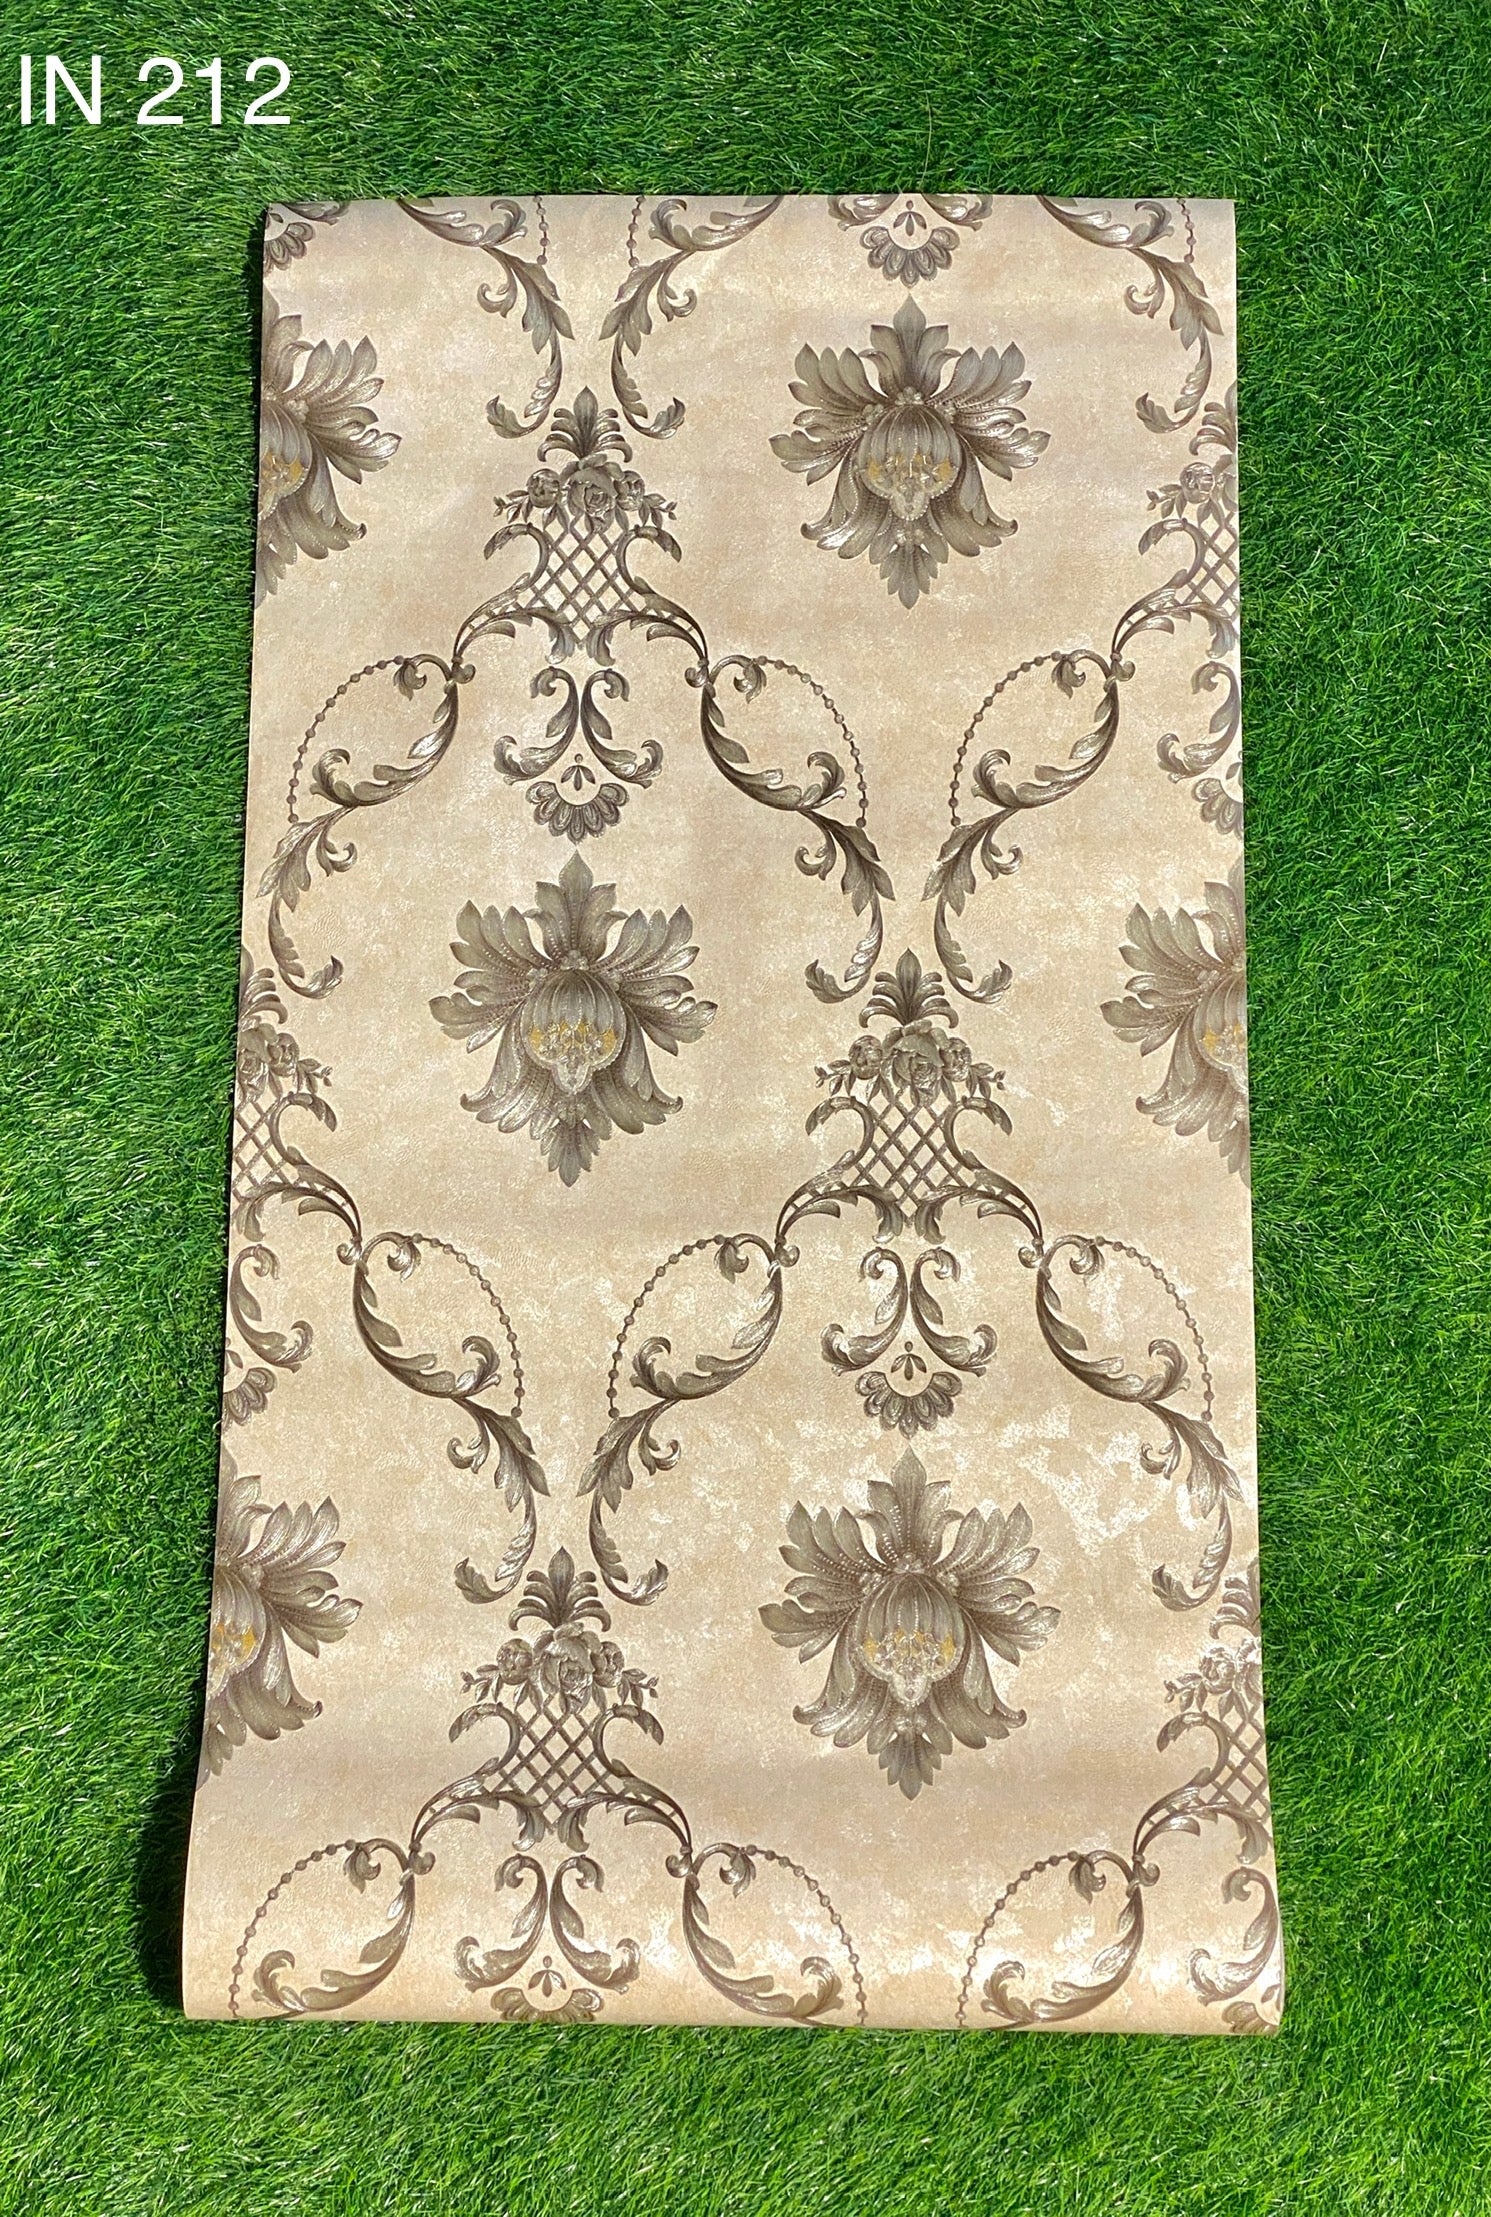 Golden And Brown Floral Pattern Not Self Adhesive 53 Cm X 1000 Cm for PVC Vinyl Coated for Wall Bedroom Living Room Latest Stylish for Home Decoration ( 57 Sqft Roll) (IN-212)